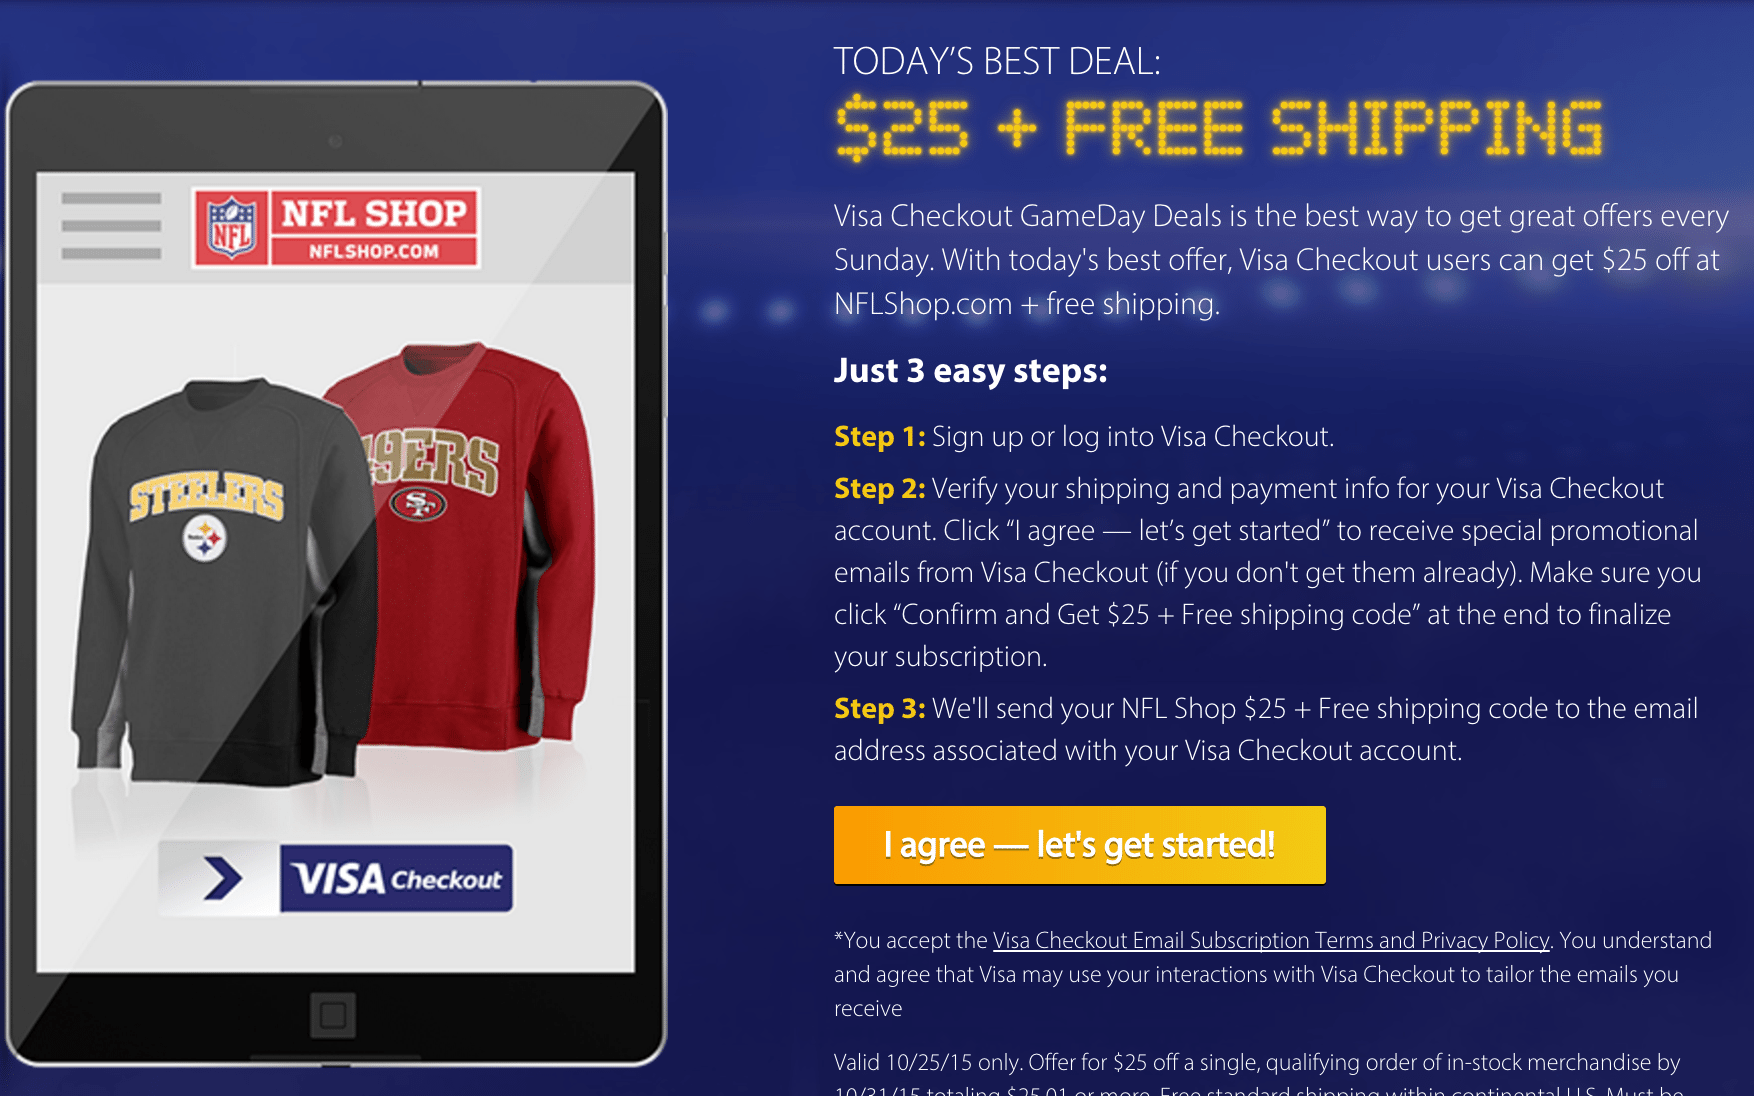 Free $25 at NFL Shops with Visa Checkout, Today Only - Doctor Of Credit